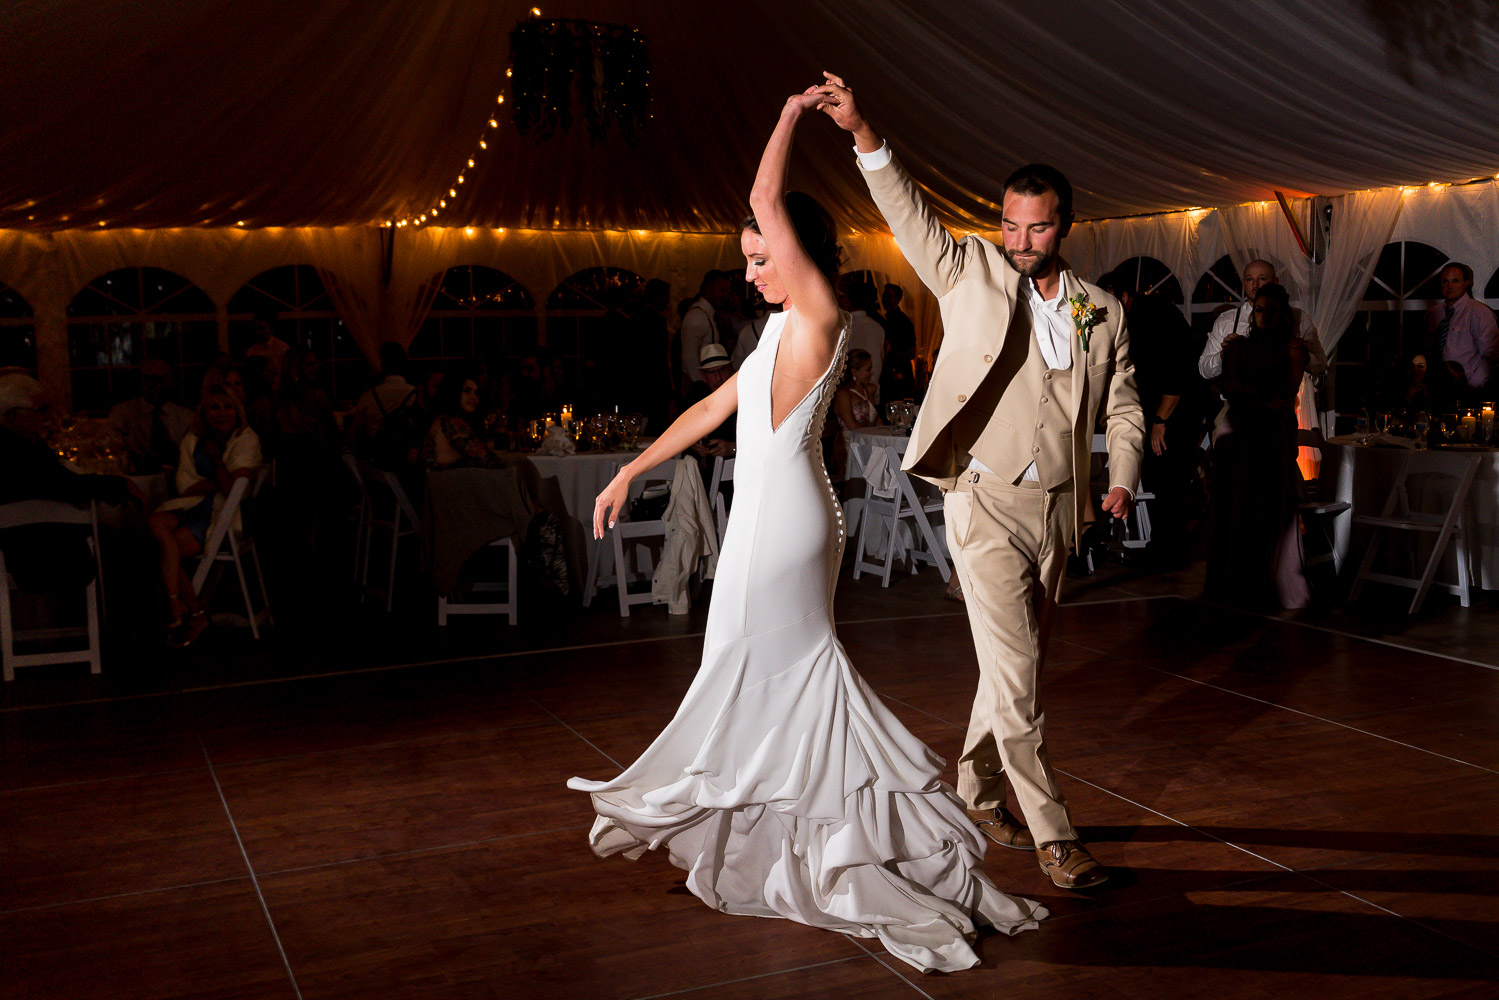 tips for photographing weddings